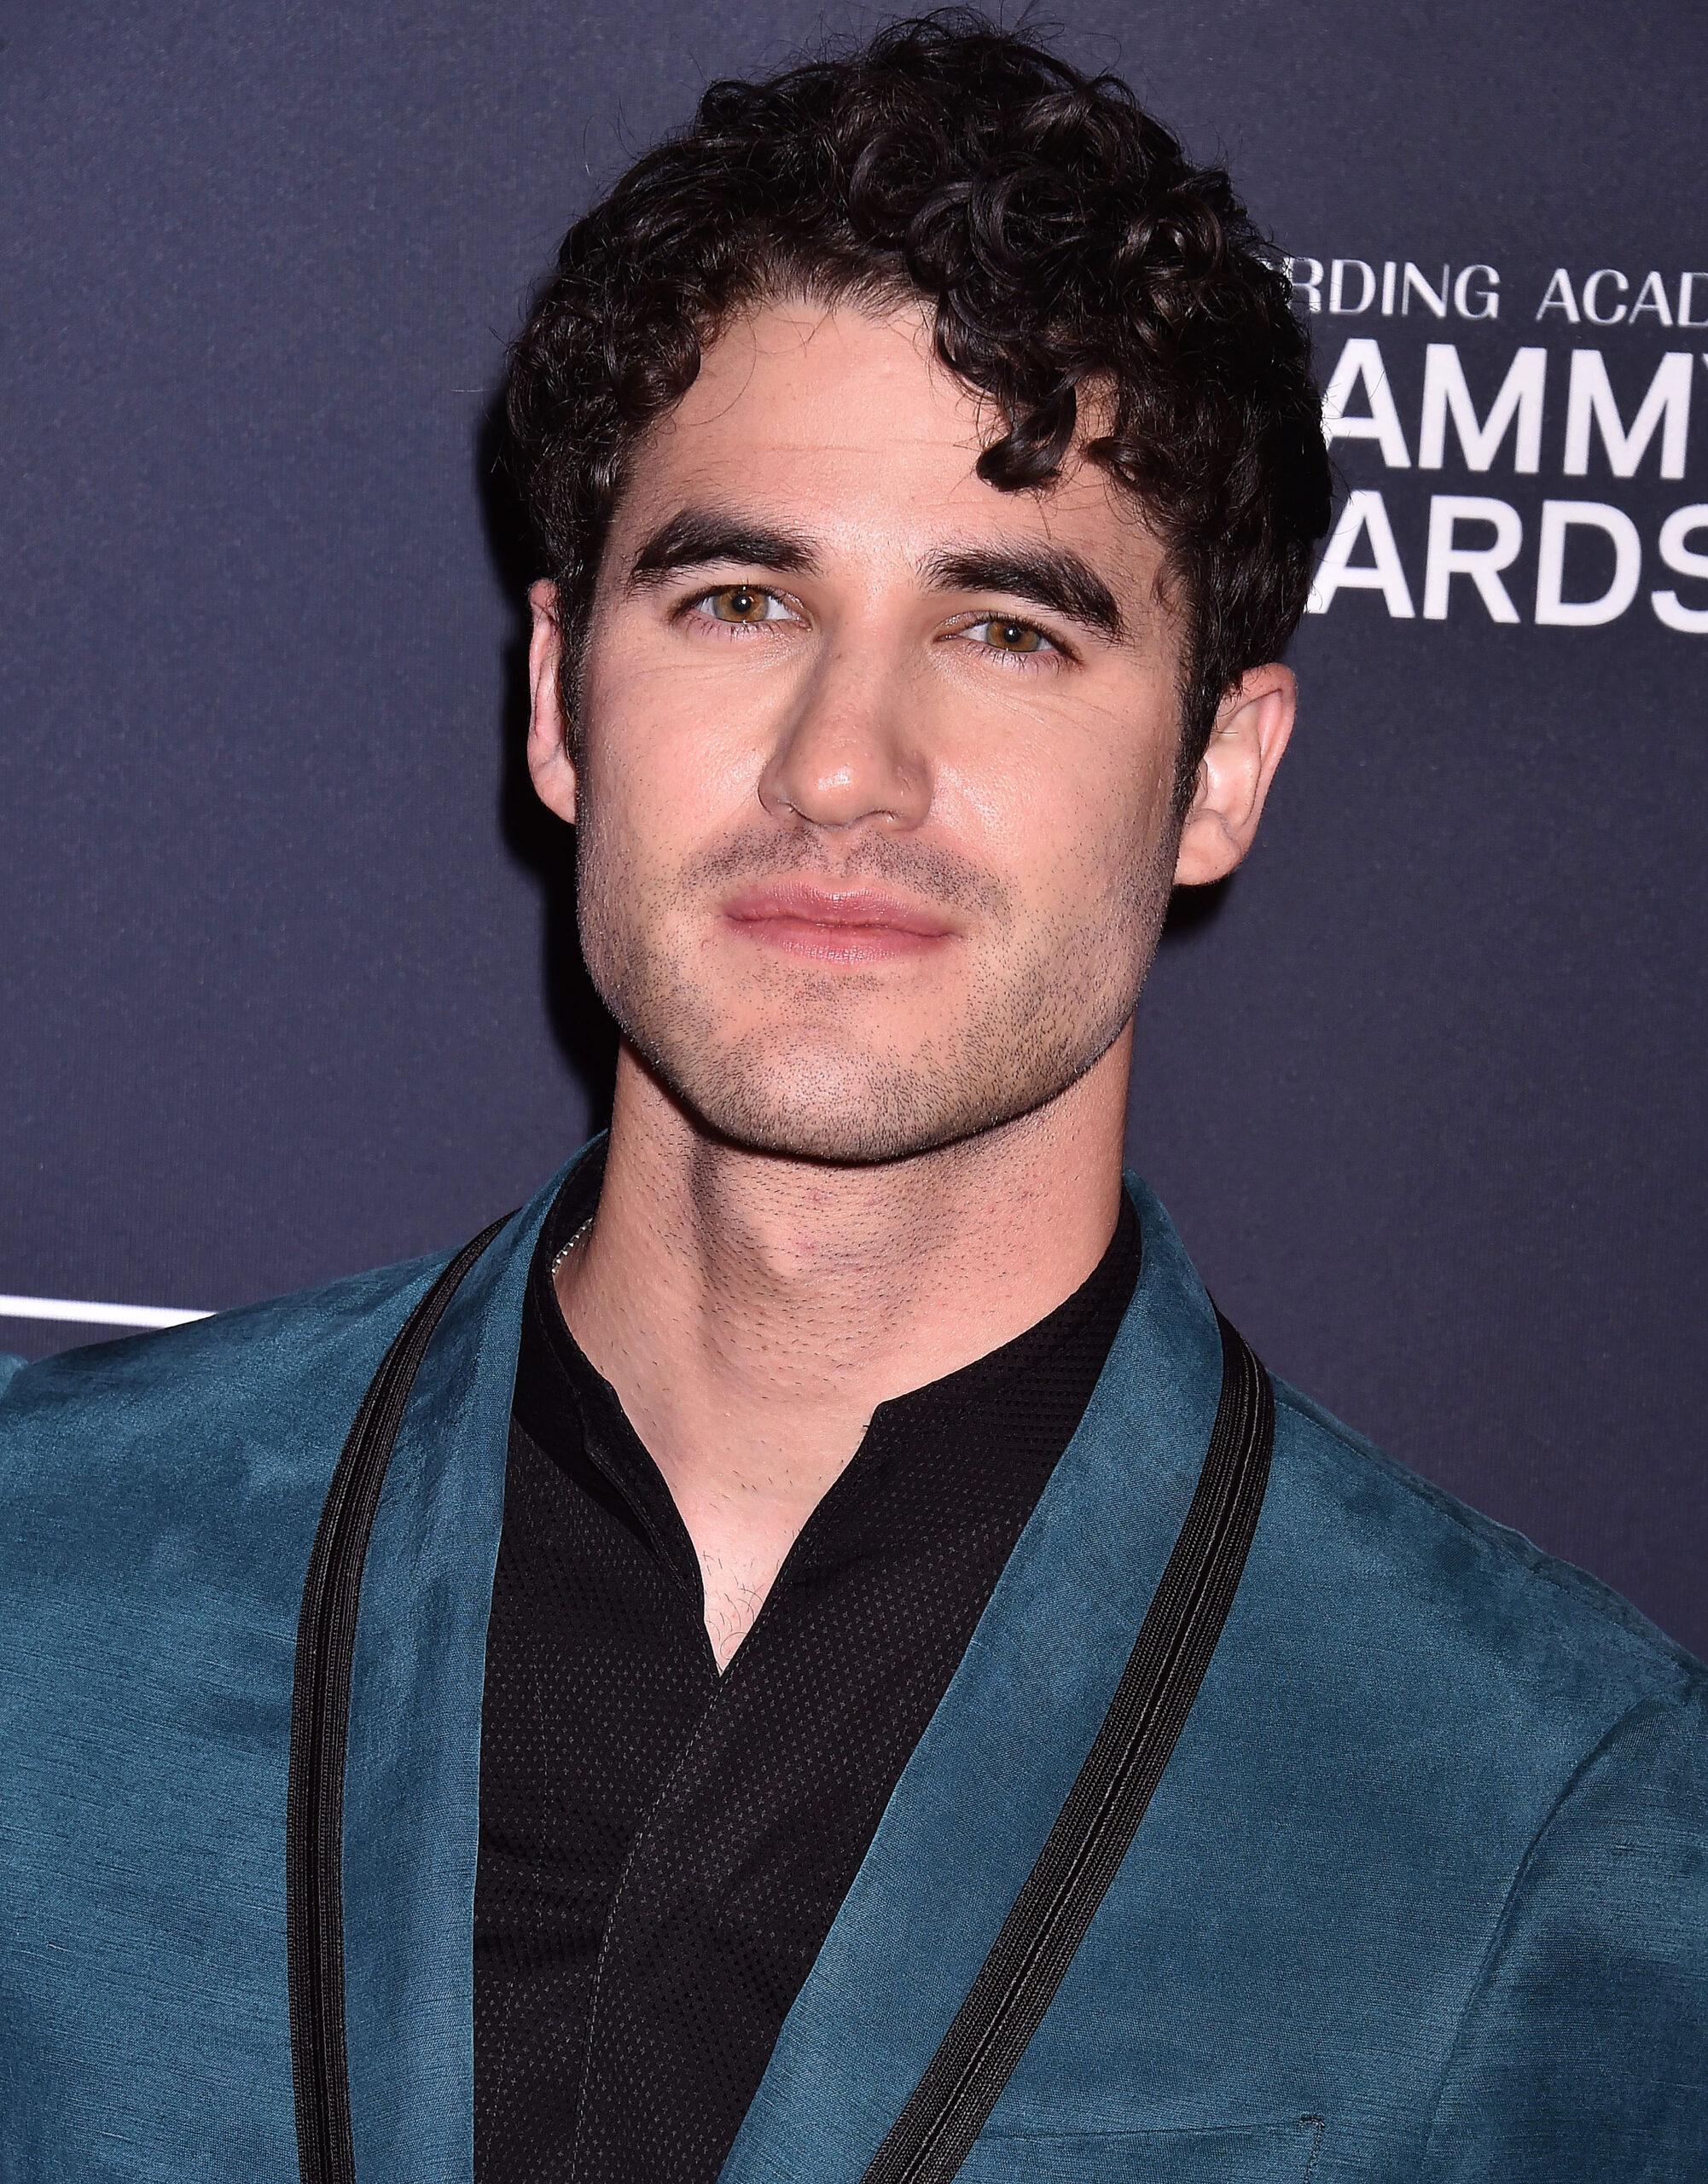 Darren Criss Describes The Loss Of His Older Brother, Chuck Criss